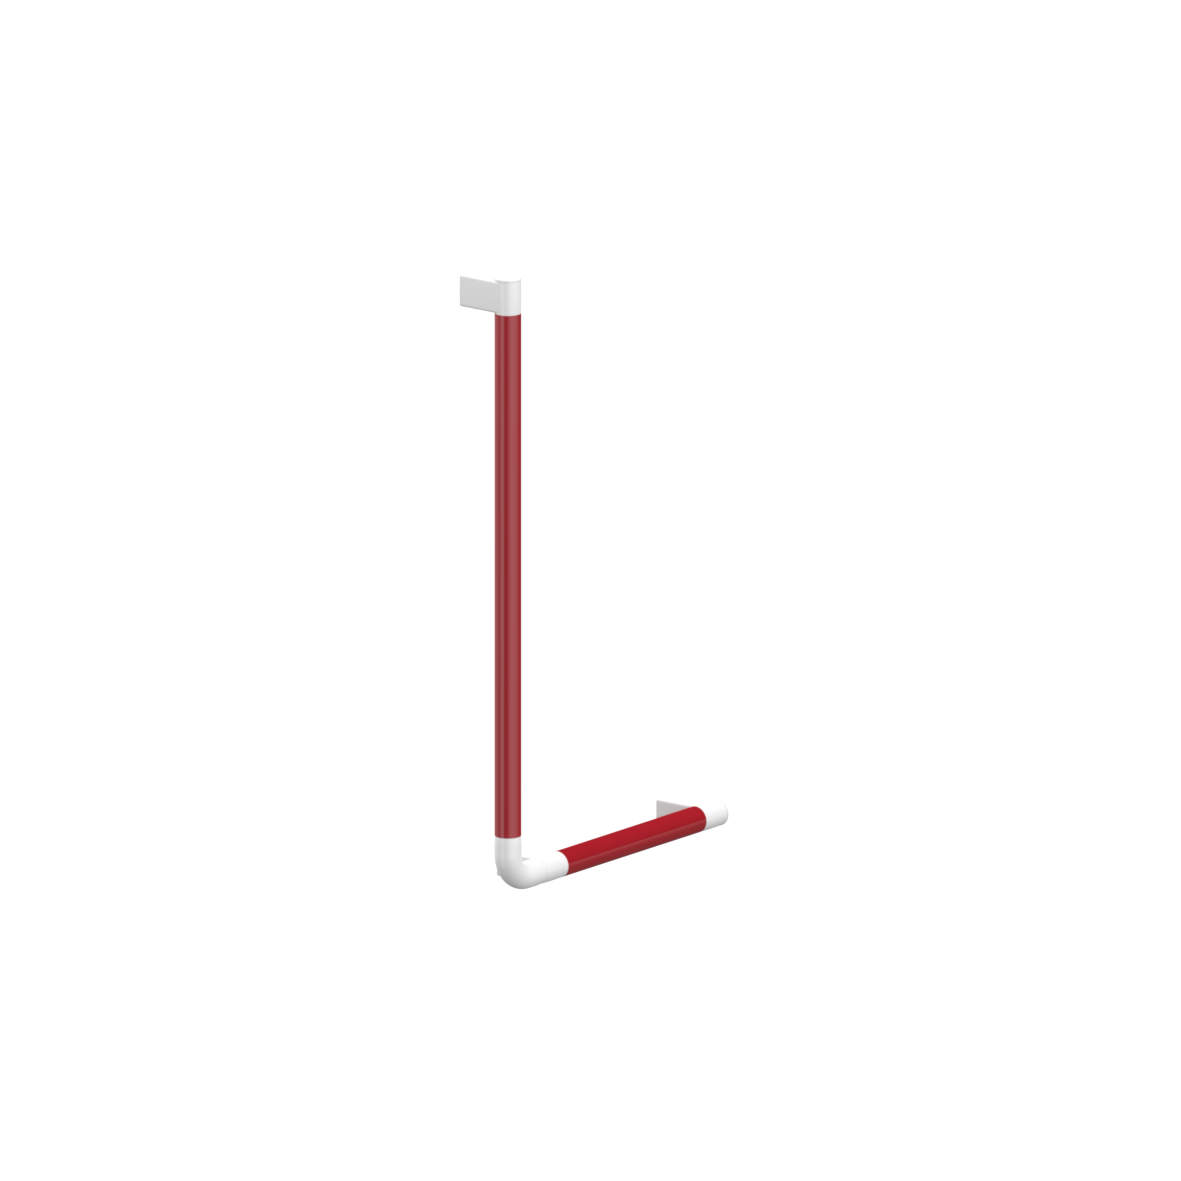 Verso Care Duo Grab rail, 90°, right, 400 x 750 mm, Red-White